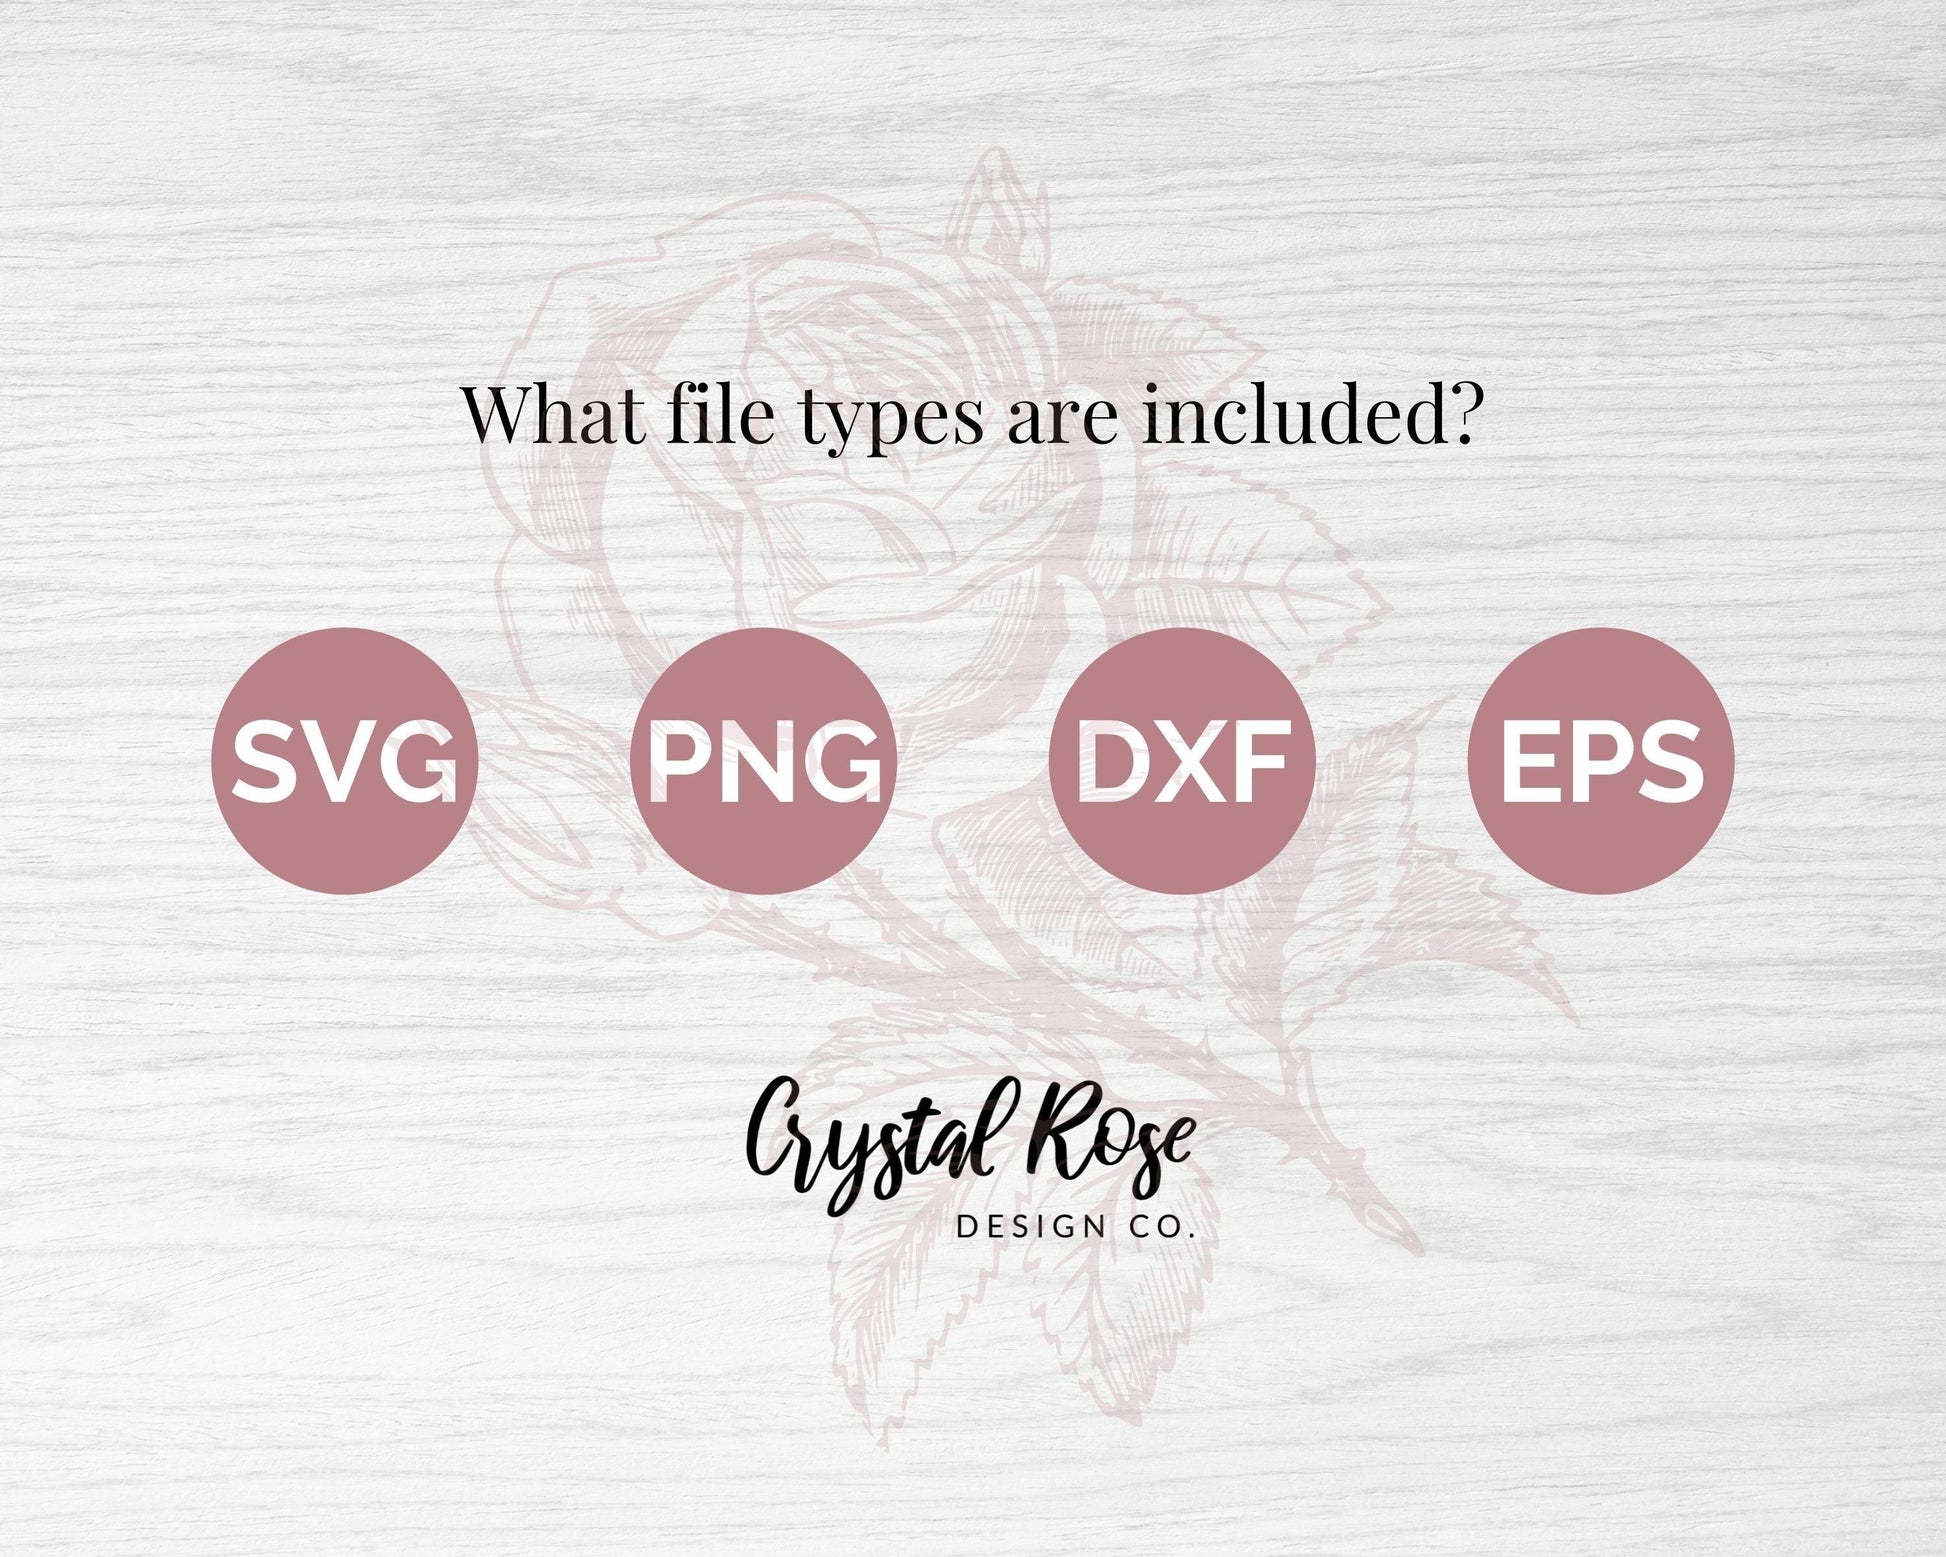 Retro Focus On The Good SVG, Inspirational SVG, Digital Download, Cricut, Silhouette, Glowforge (includes svg/png/dxf/eps) - Crystal Rose Design Co.